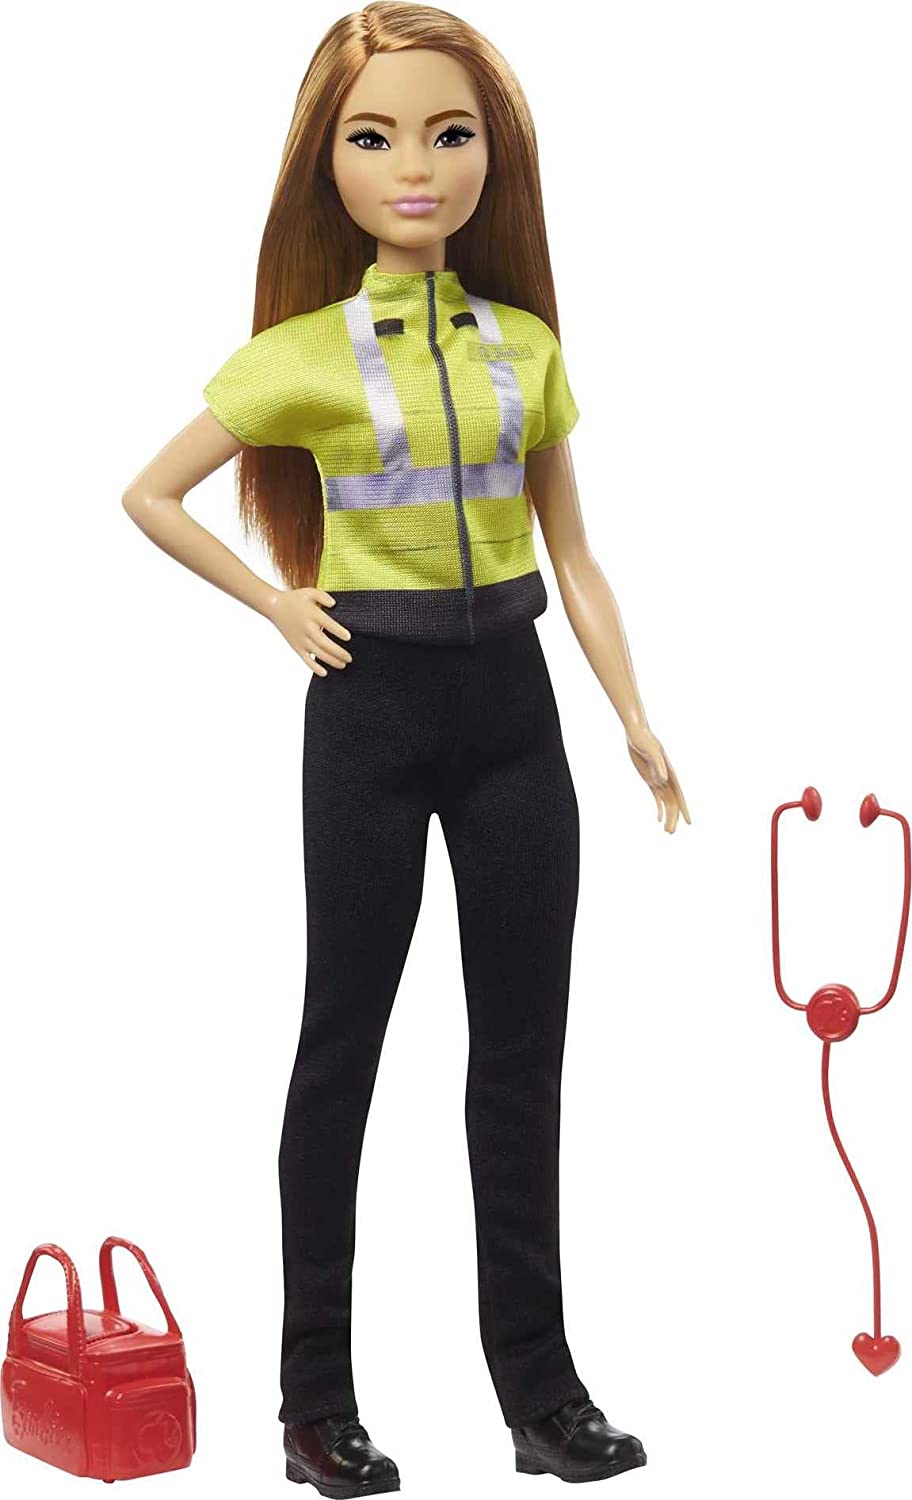 12" Barbie Paramedic Doll w/ Accessories $4.79 + Free Shipping w/ Prime or on orders over $25